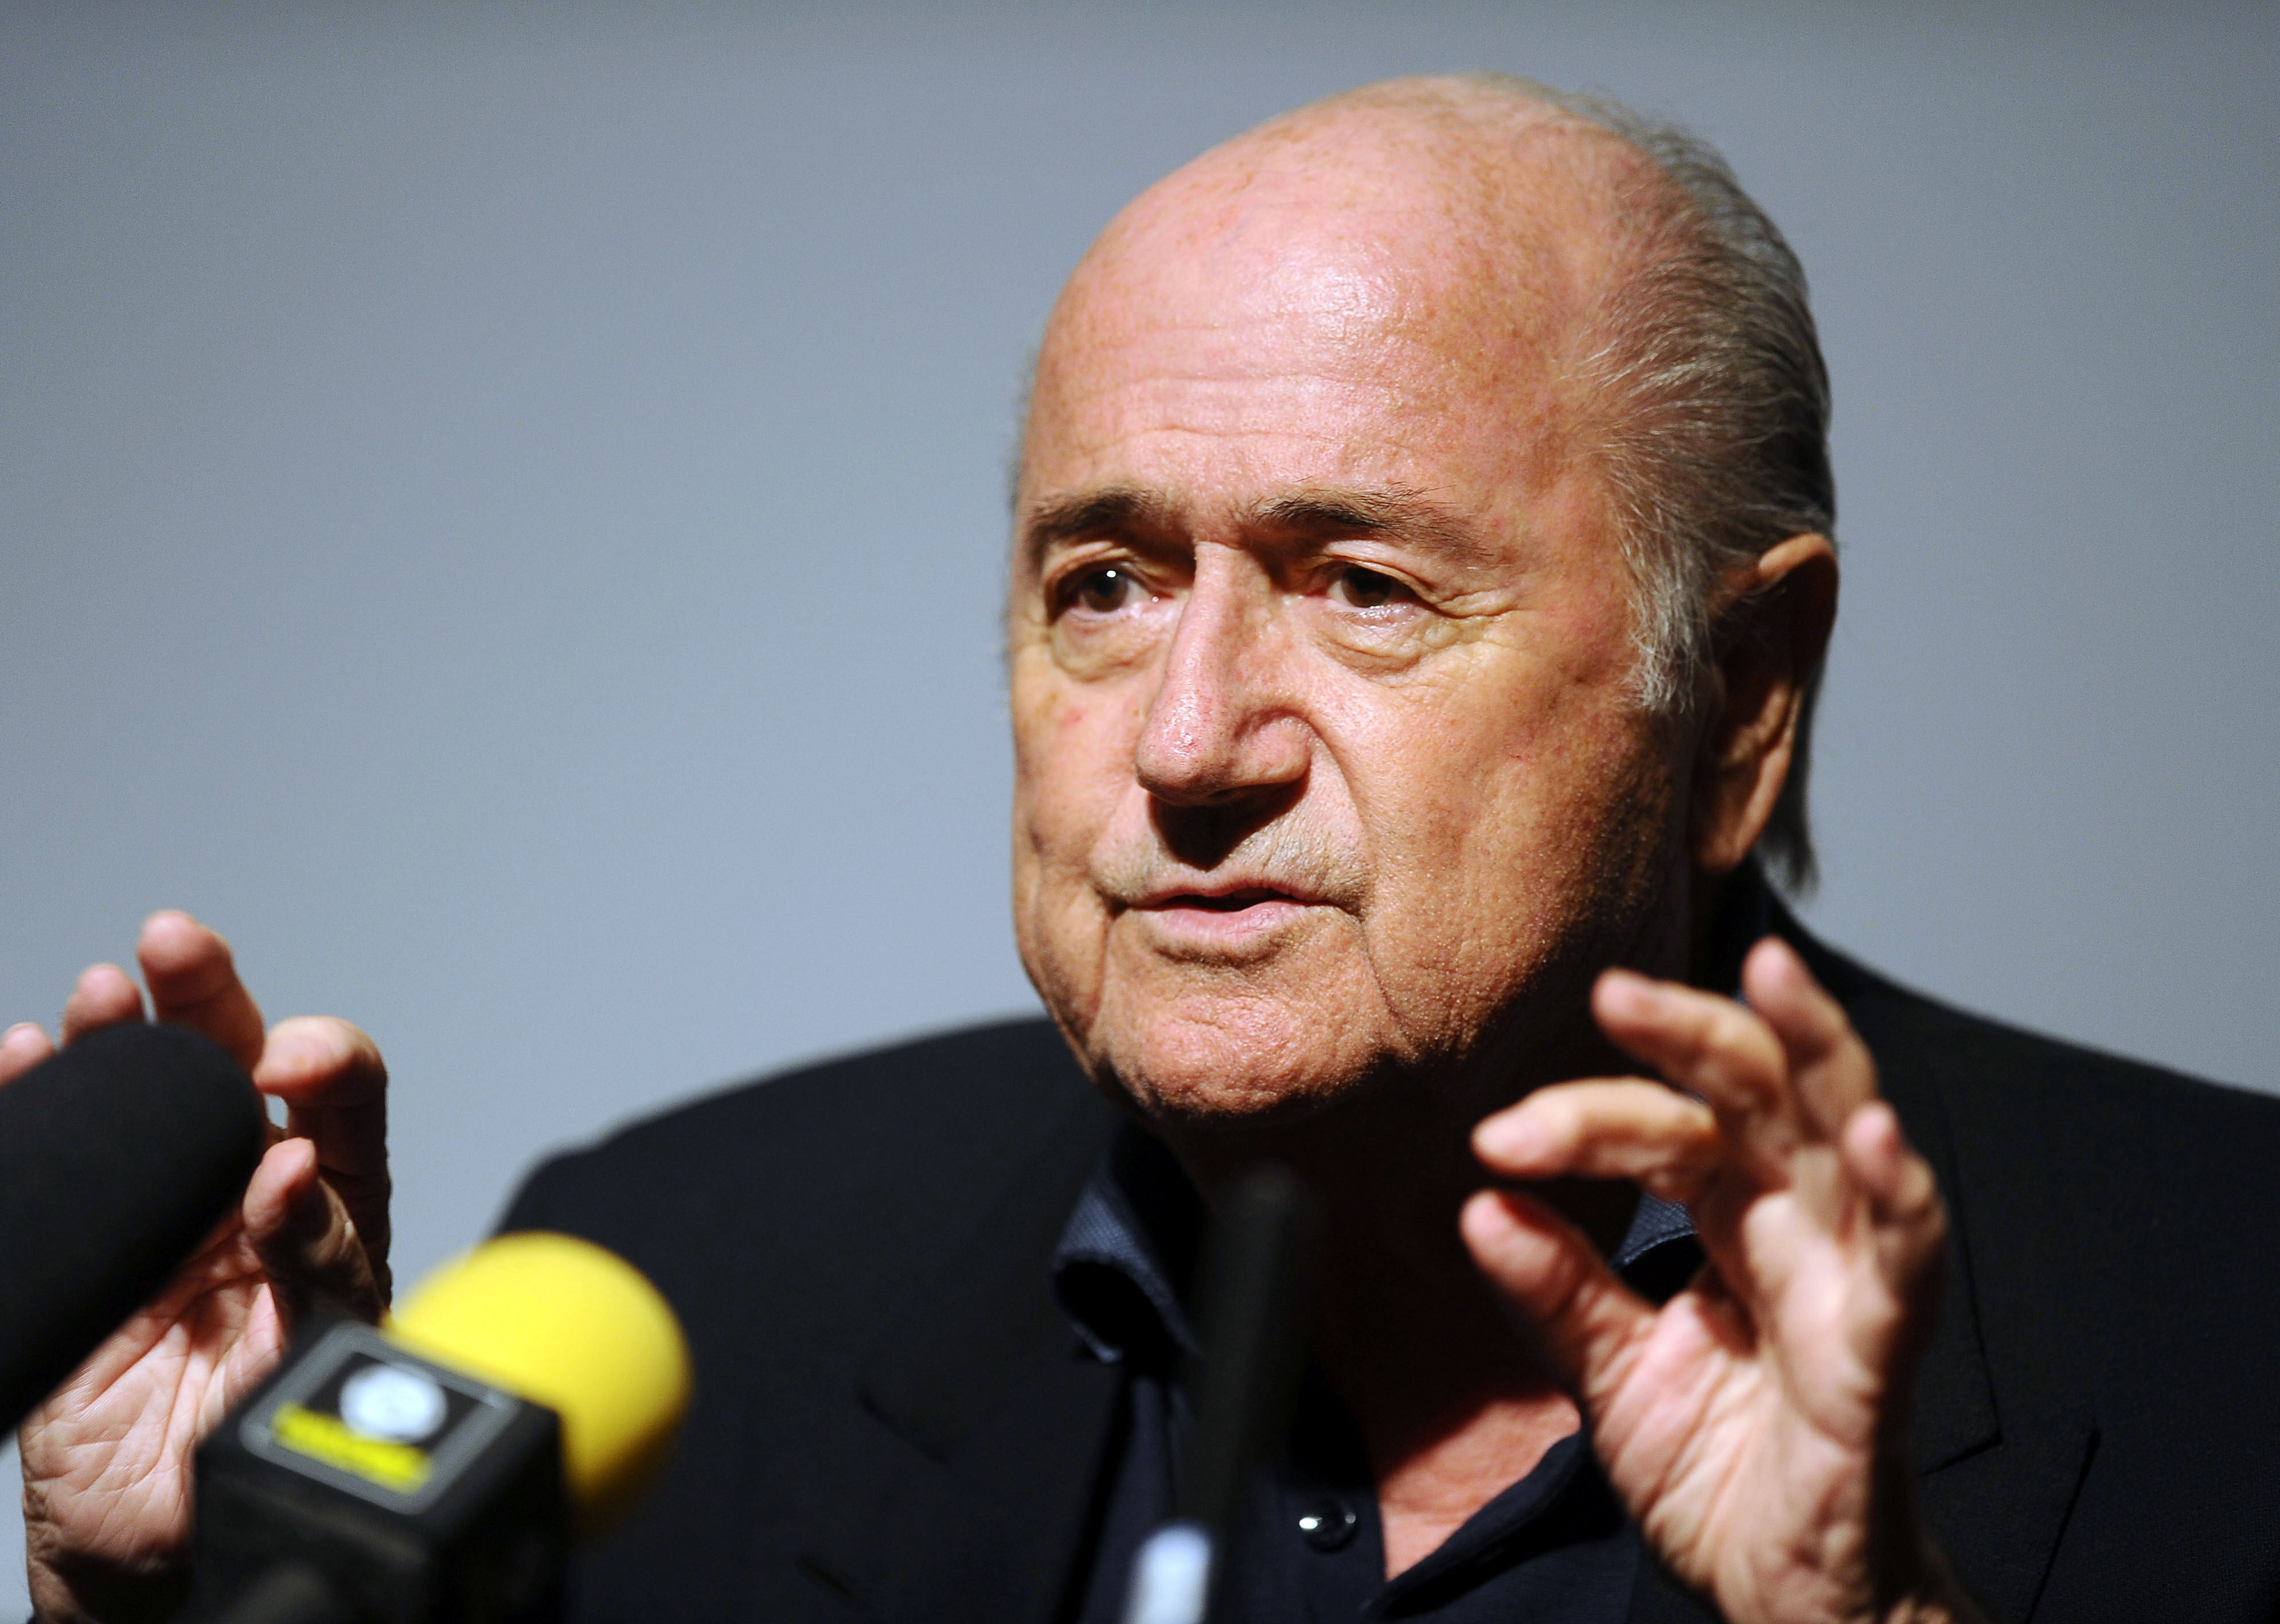 The 2015 Fifa scandal saw the end of Sepp Blatter’s reign